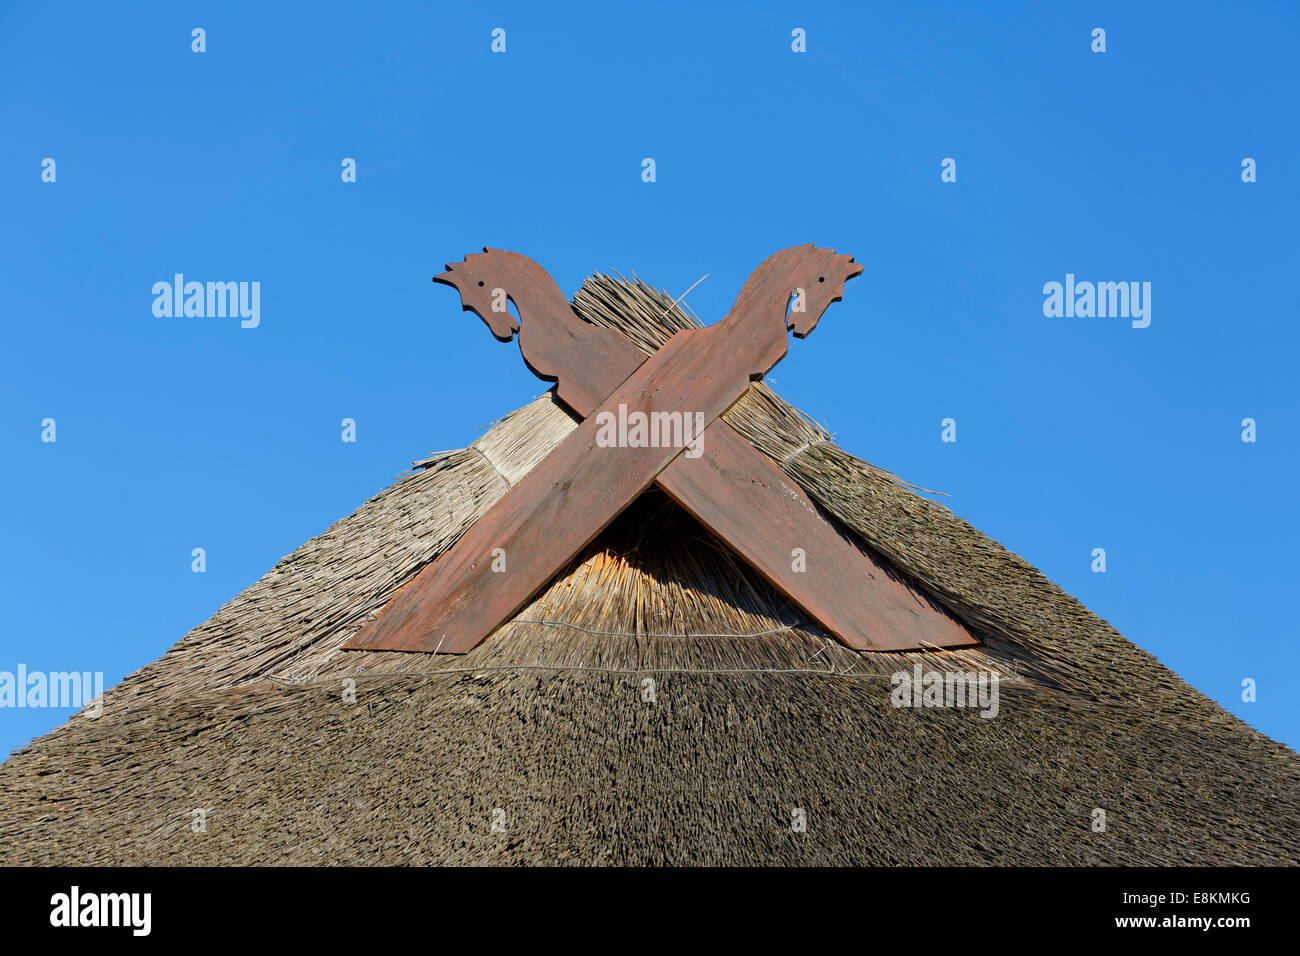 Thatched roof, horse heads or Muulapen as with gable adornment, Ahrenshoop, Darß, Mecklenburg-Vorpommern, Germany Stock Photo